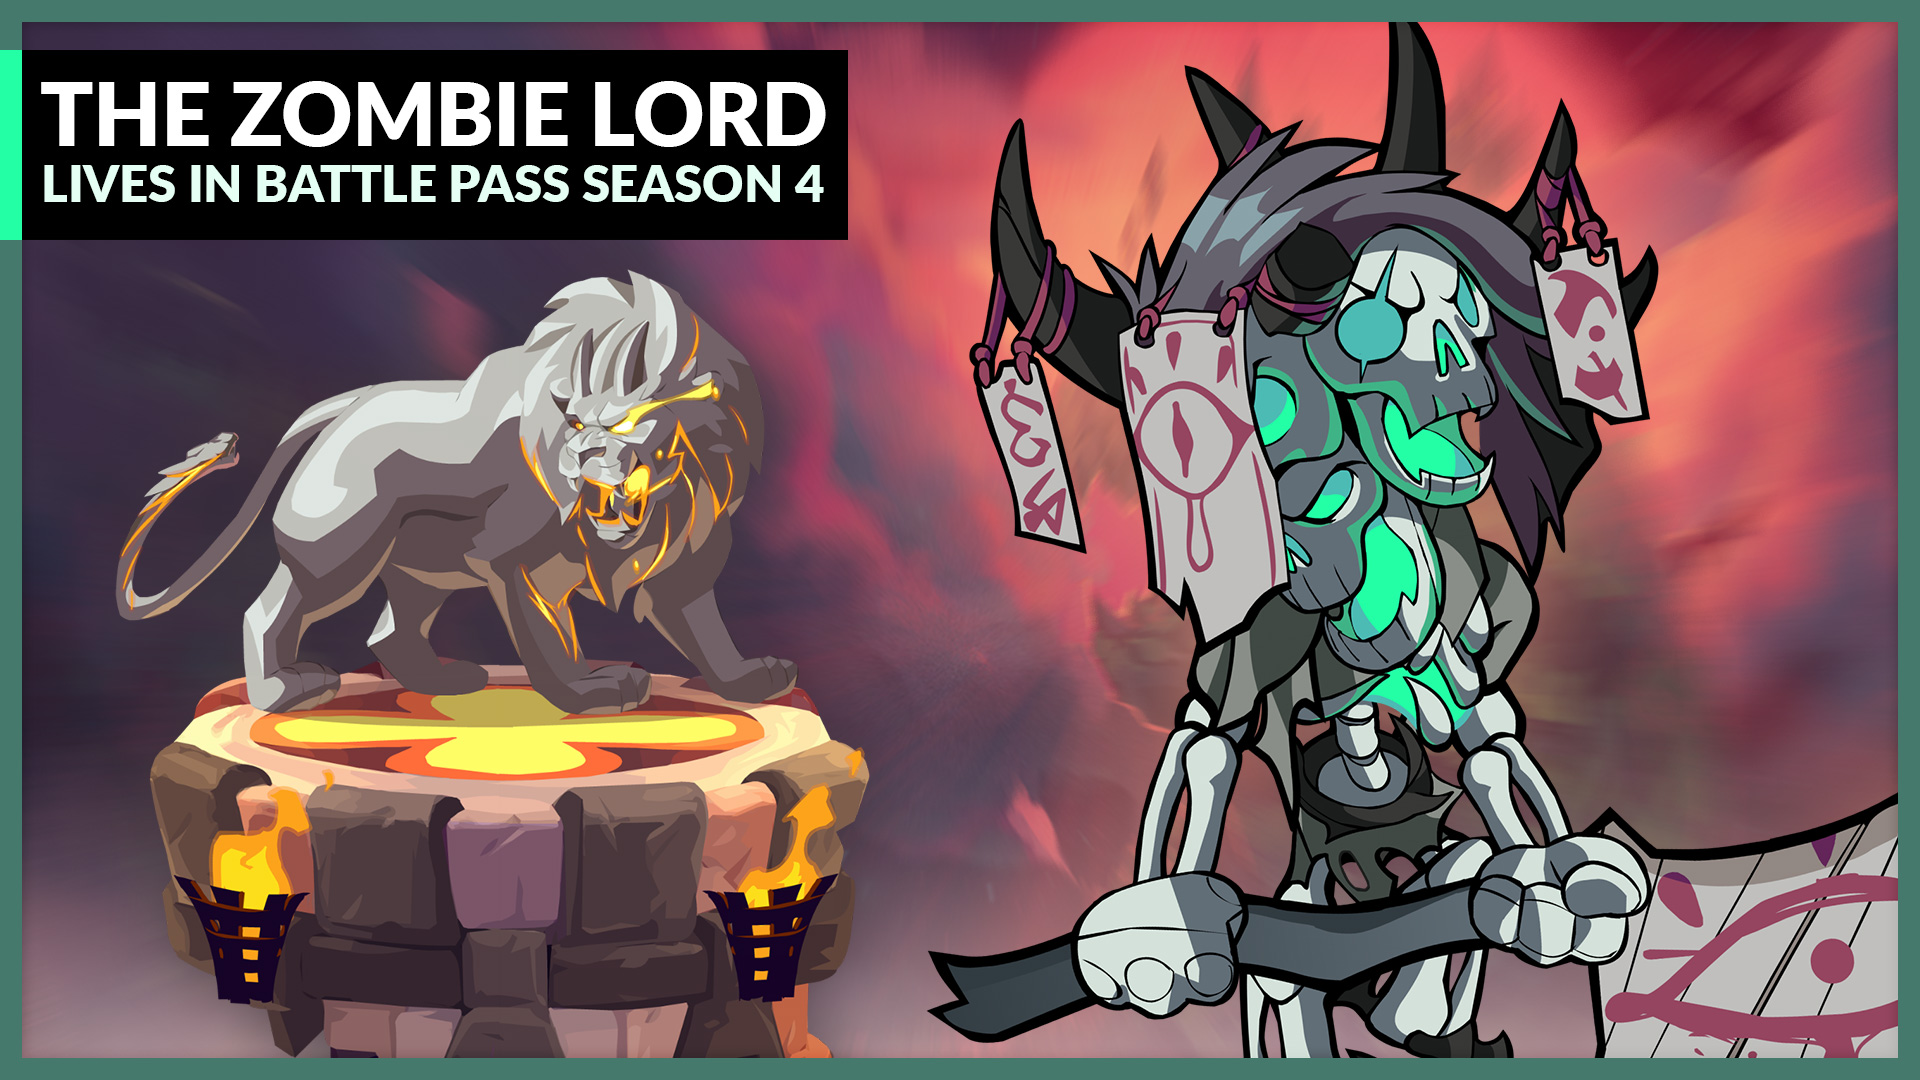 The Zombie Lord Lives in Battle Pass Season 4